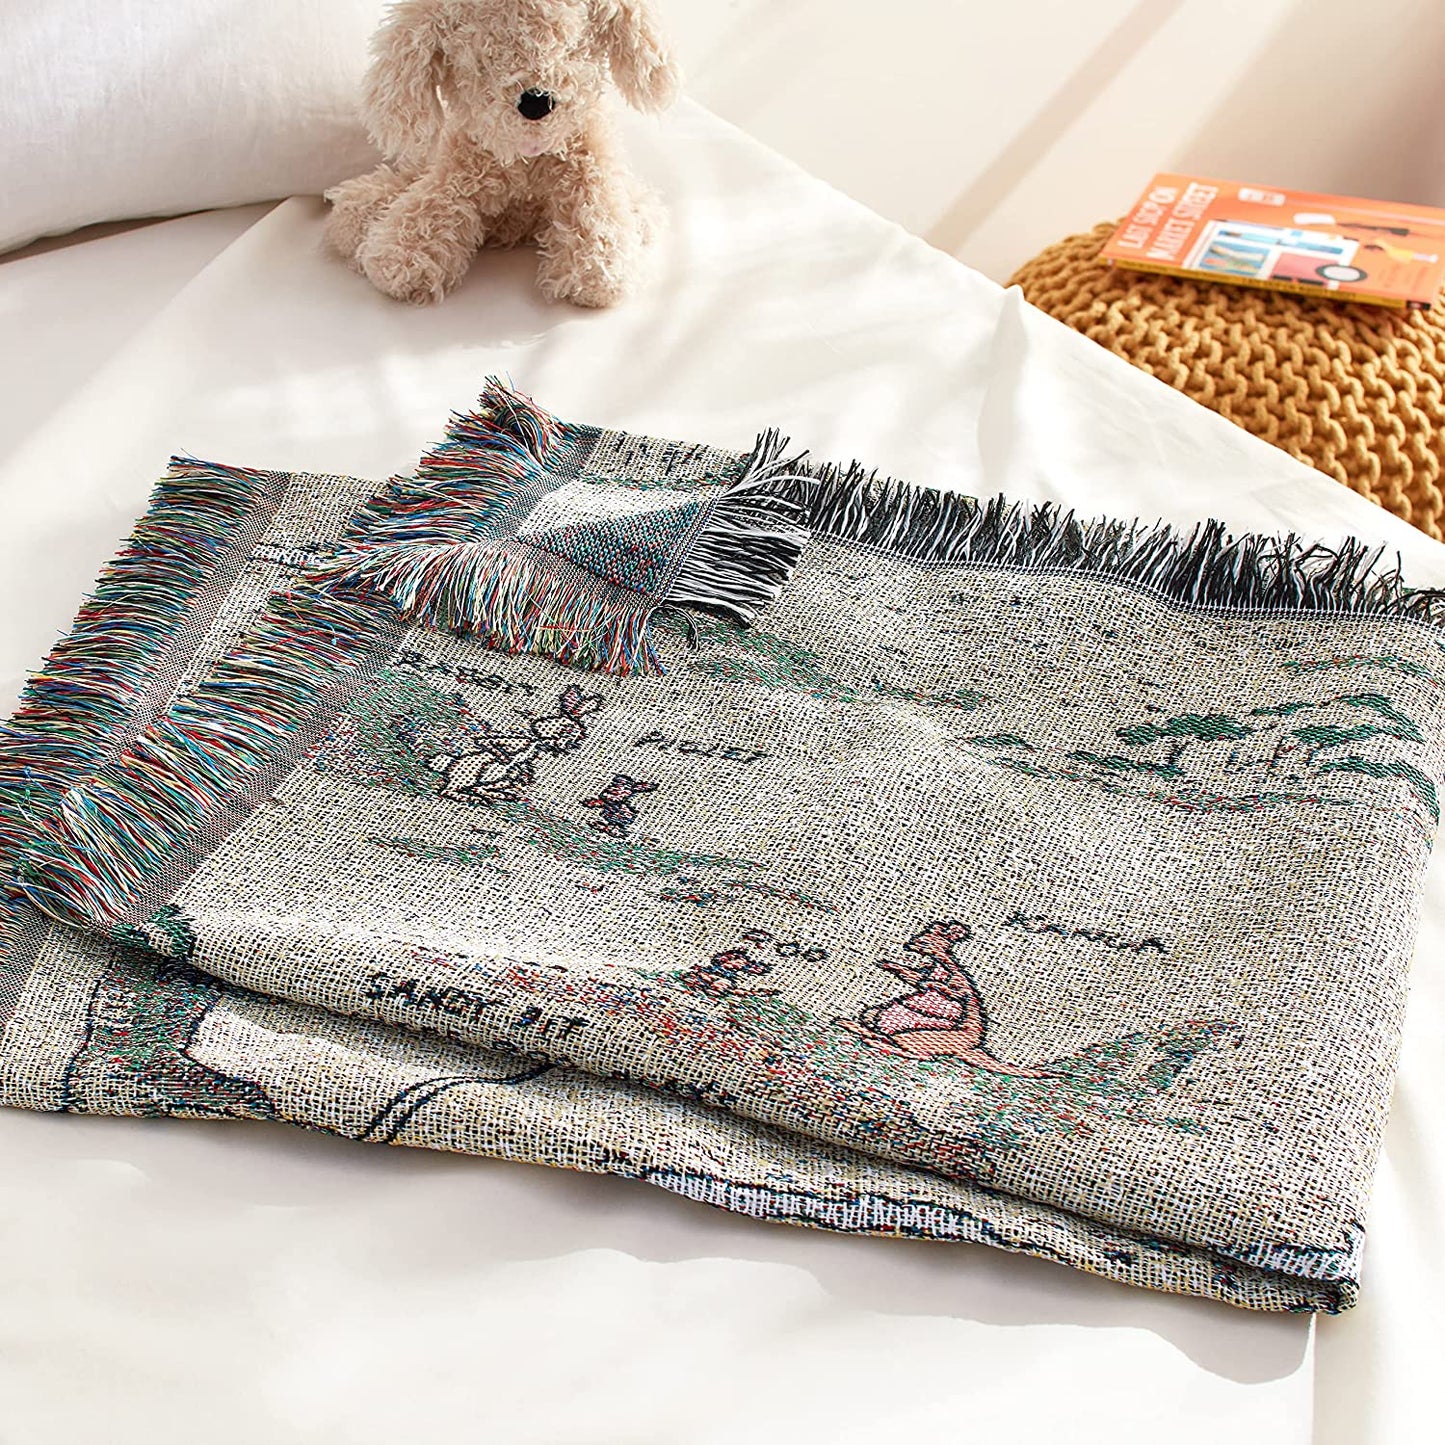 Load image into Gallery viewer, Hundred Acre Woods (Winnie the Pooh) Disney Woven Tapestry Throw Blanket
